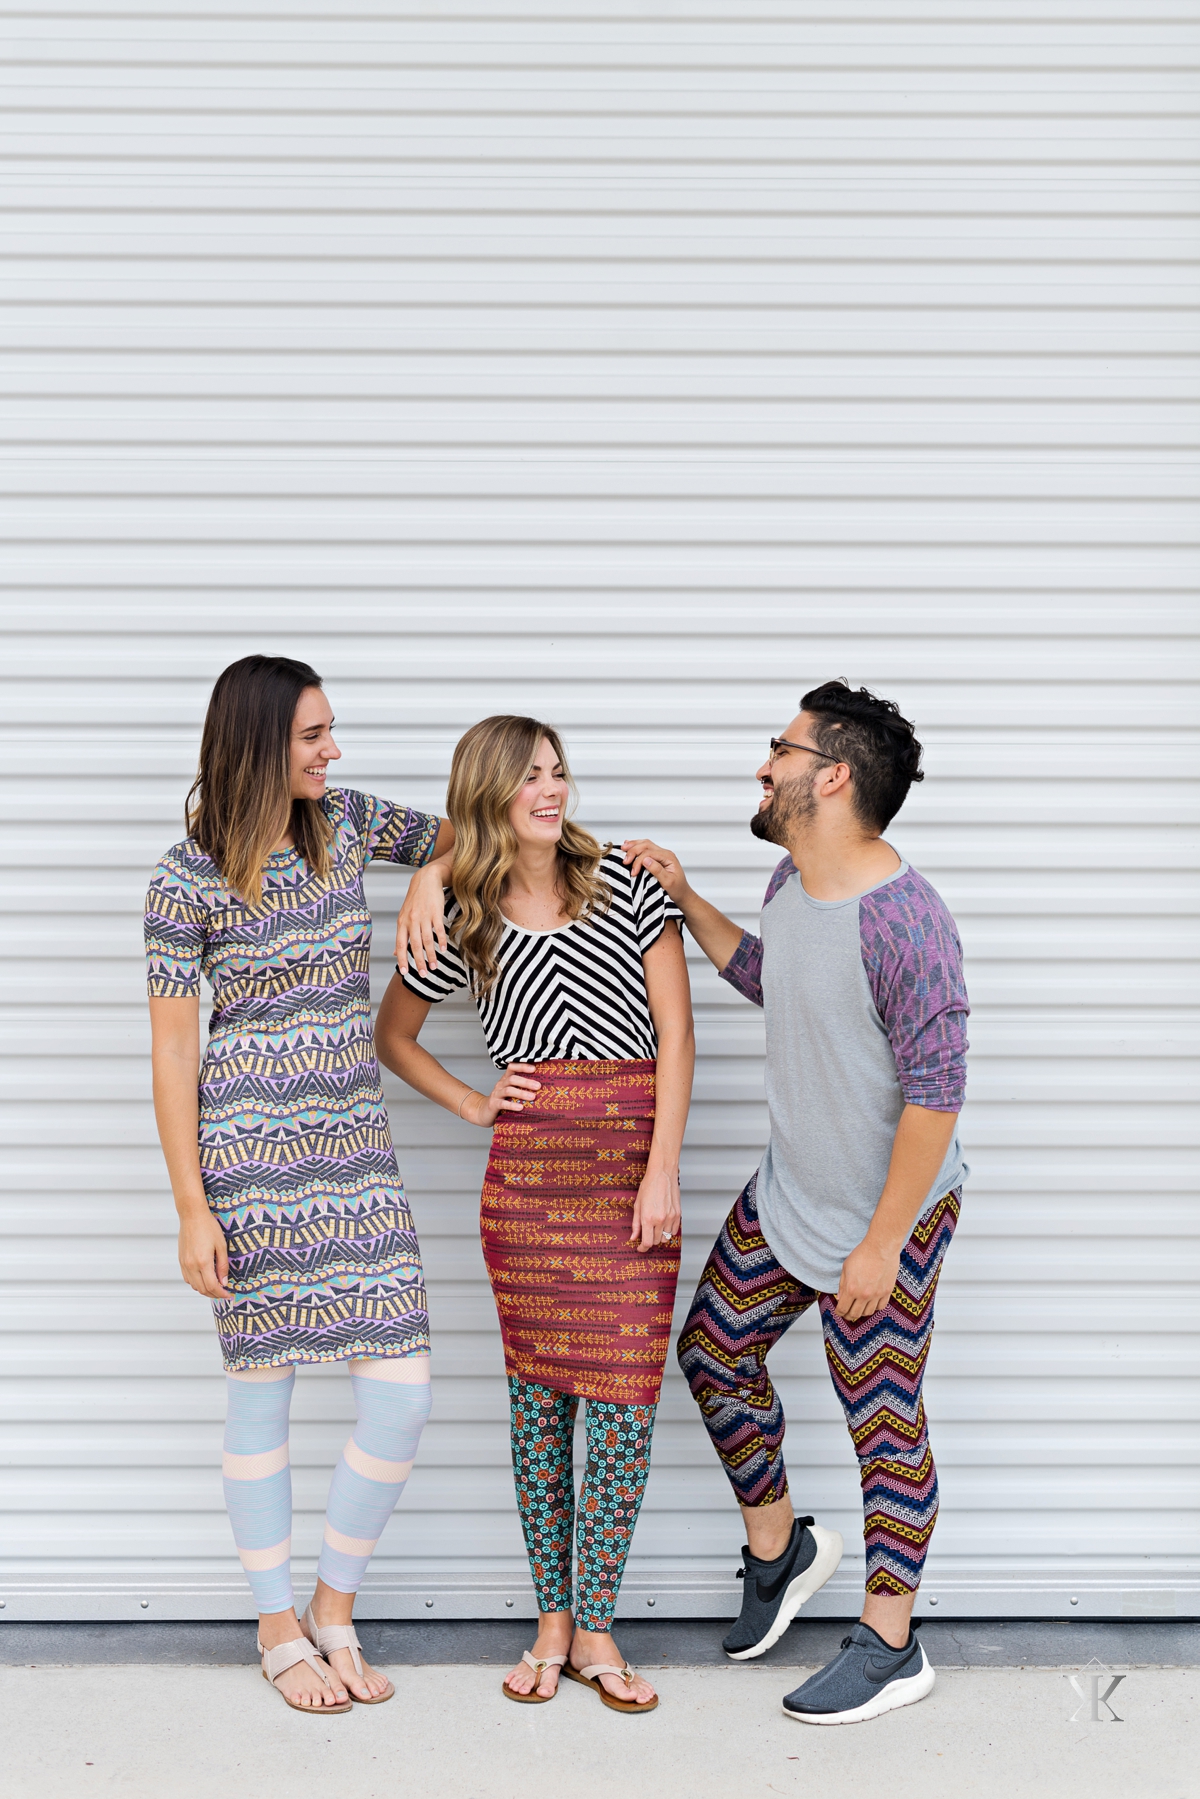 Try Me Series: LuLaRoe Review - Kristen Weaver Photography